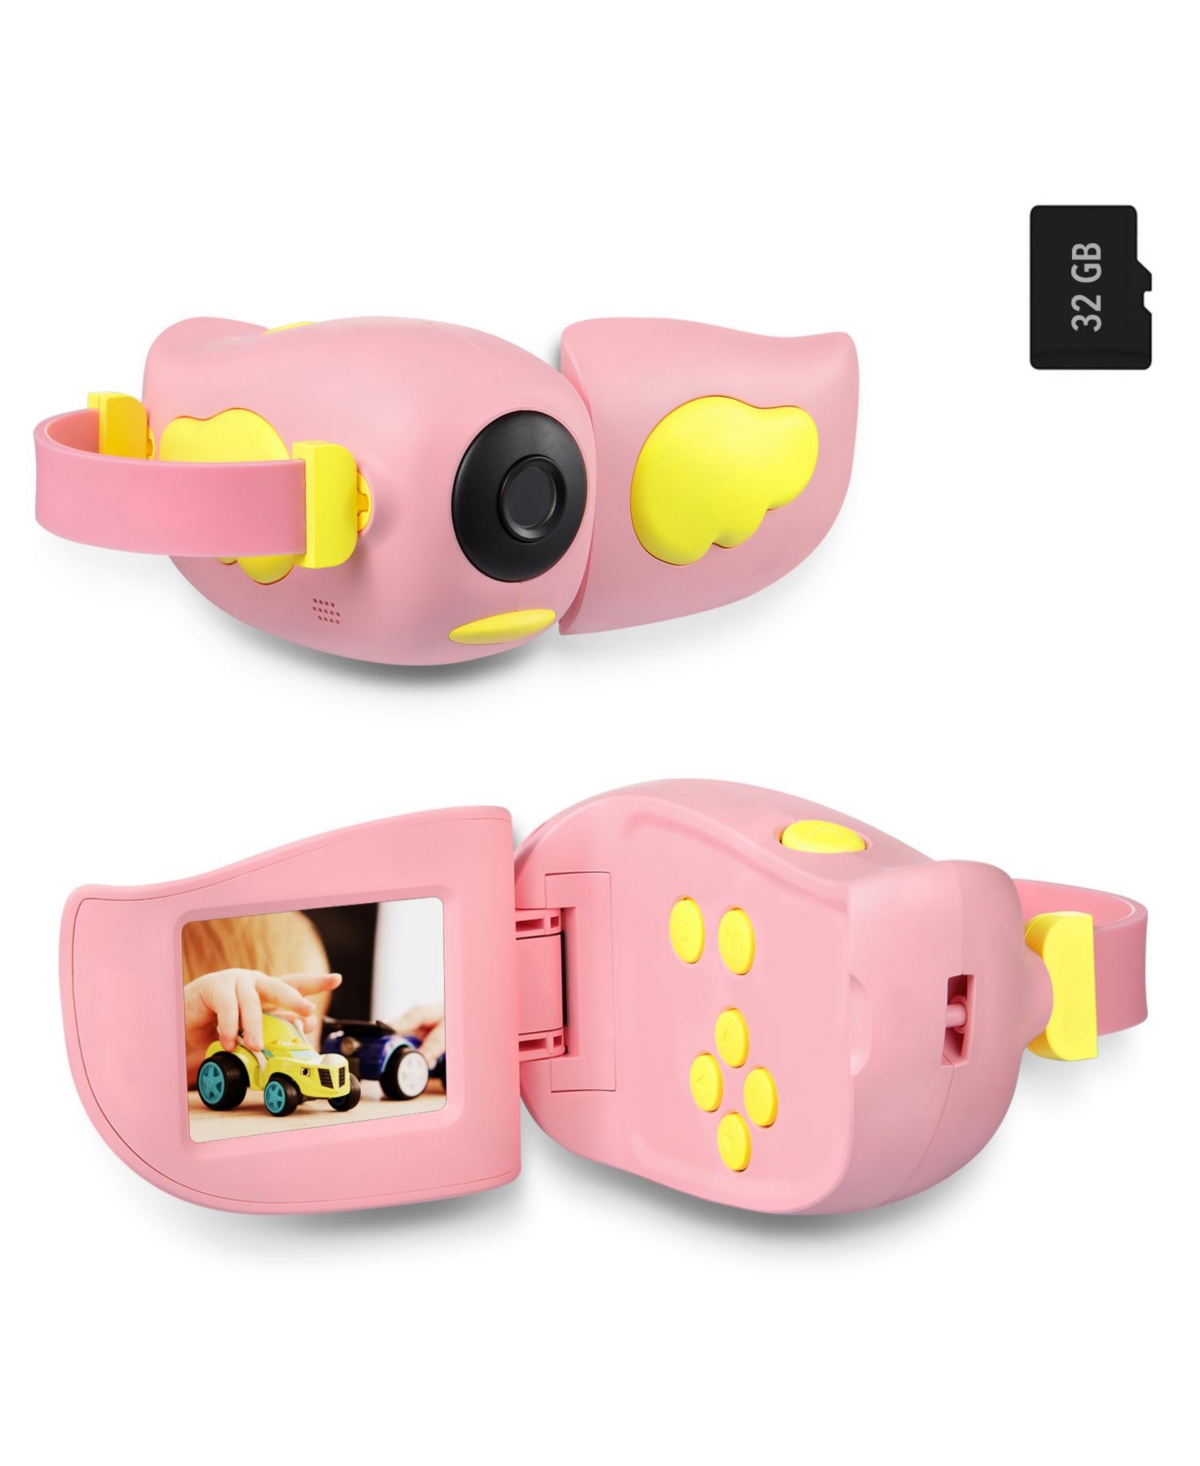 Dartwood 720p Hd Kids Video Camera / Camcorder With 2.0 Color Display Screen In Pink